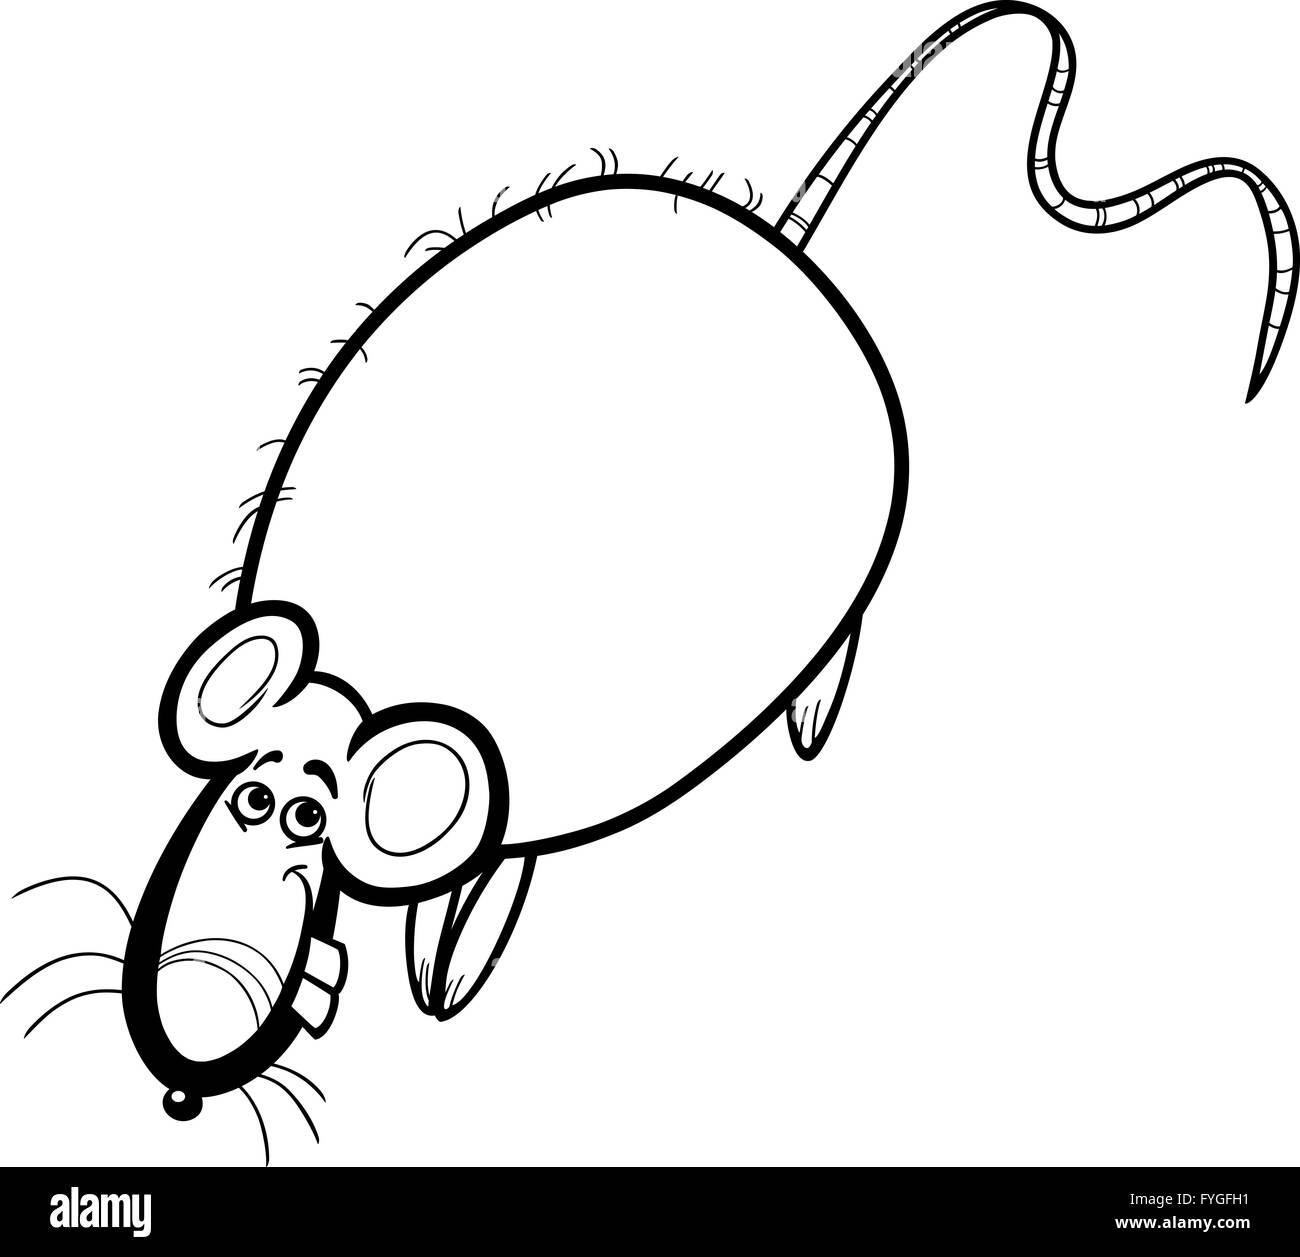 rat cartoon character for coloring book Stock Photo